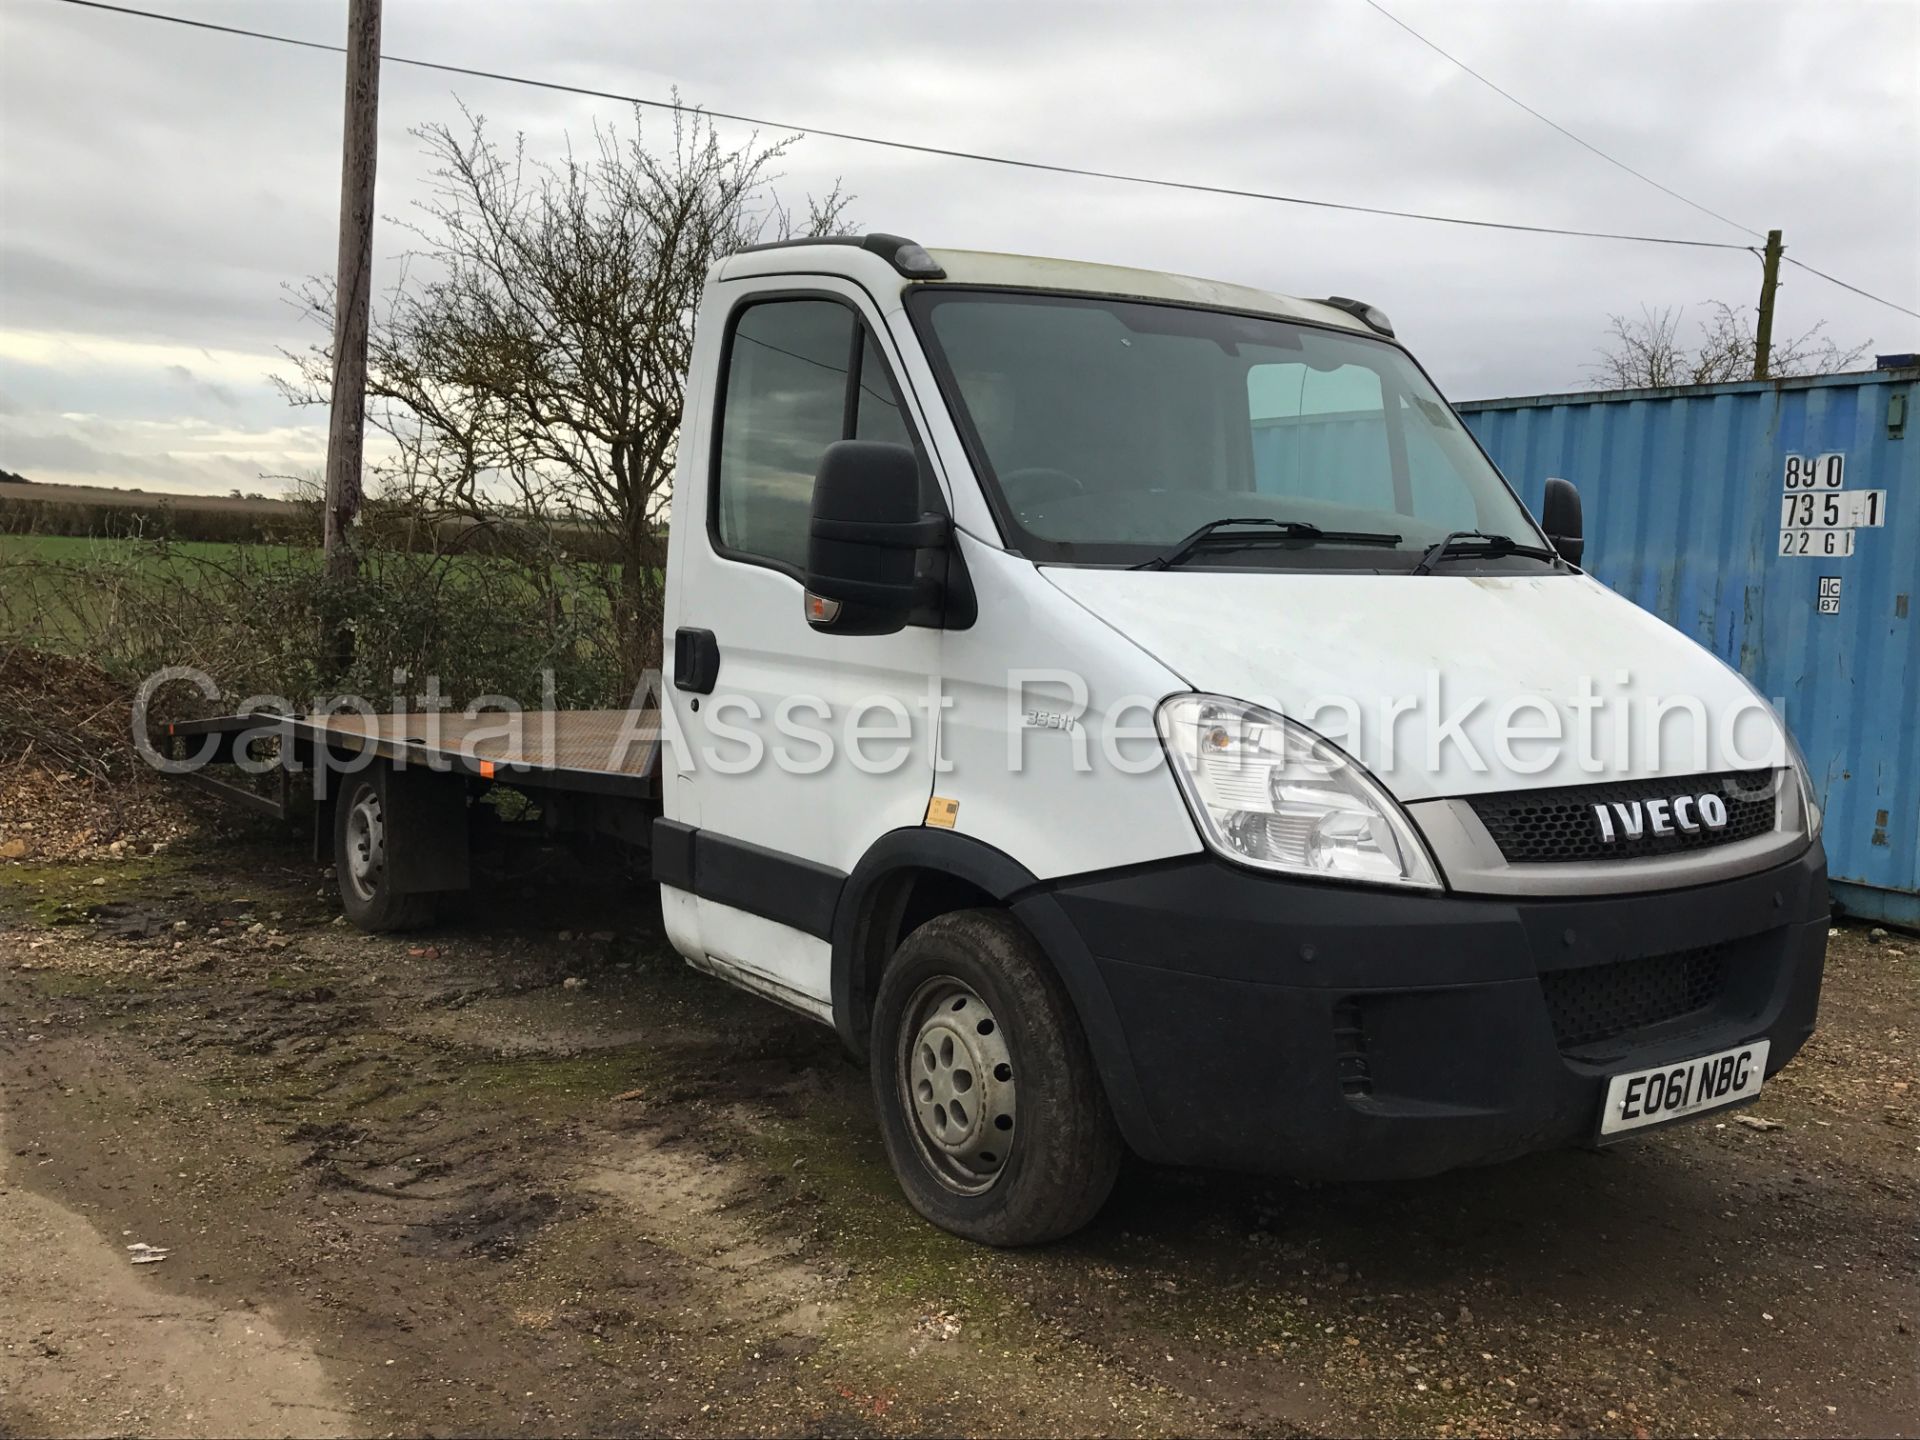 (On Sale) IVECO DAILY 35S11 '16 FT RECOVERY TRUCK' (2012 MODEL) *BRAND NEW BODY* (1 OWNER FROM NEW) - Image 2 of 10